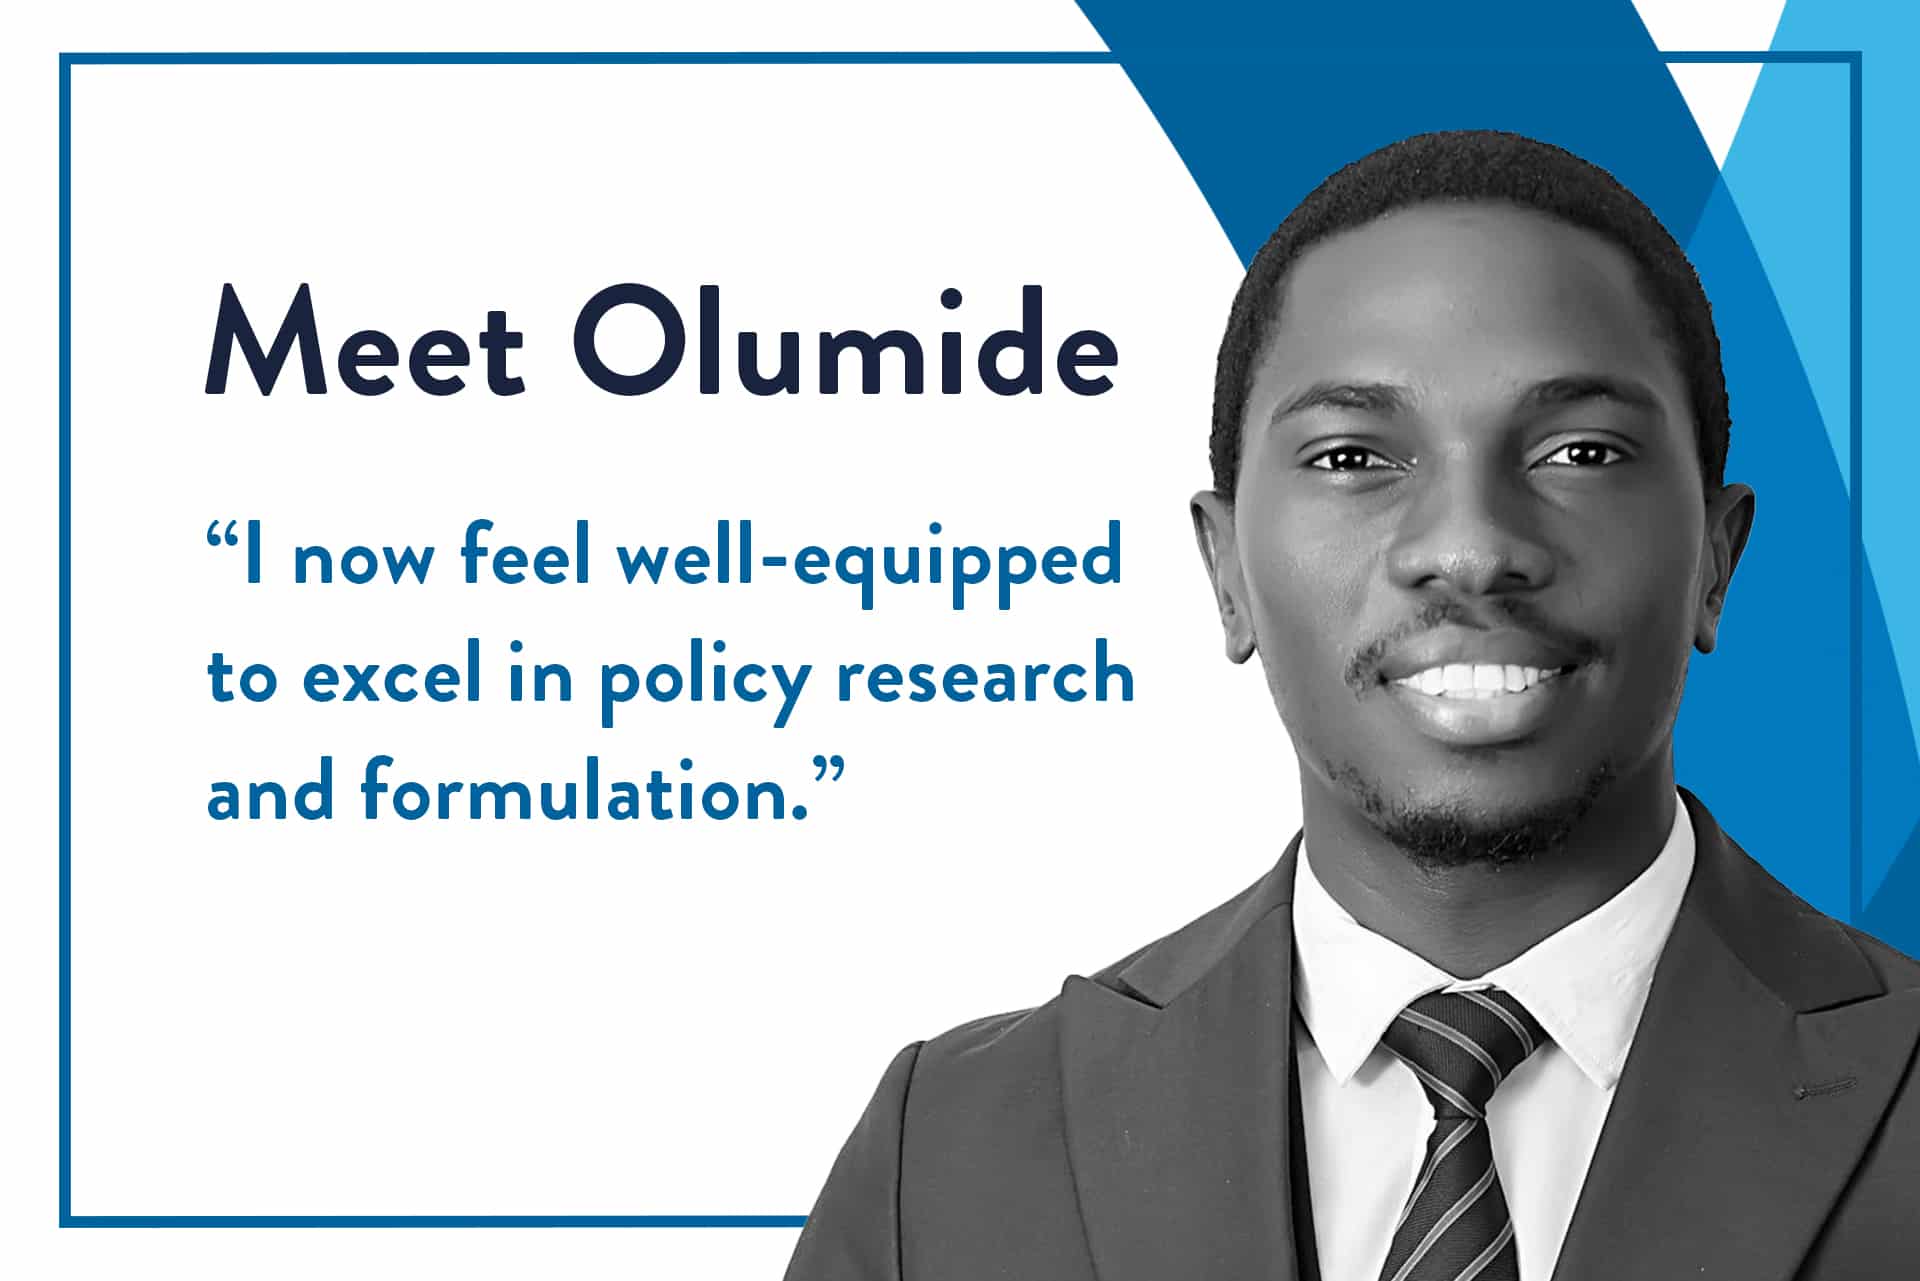 Blog header with a photo of the student, a title that reads 'Meet Olumide' and a quote that reads: "I now feel well-equipped to excel in policy research and formulation."